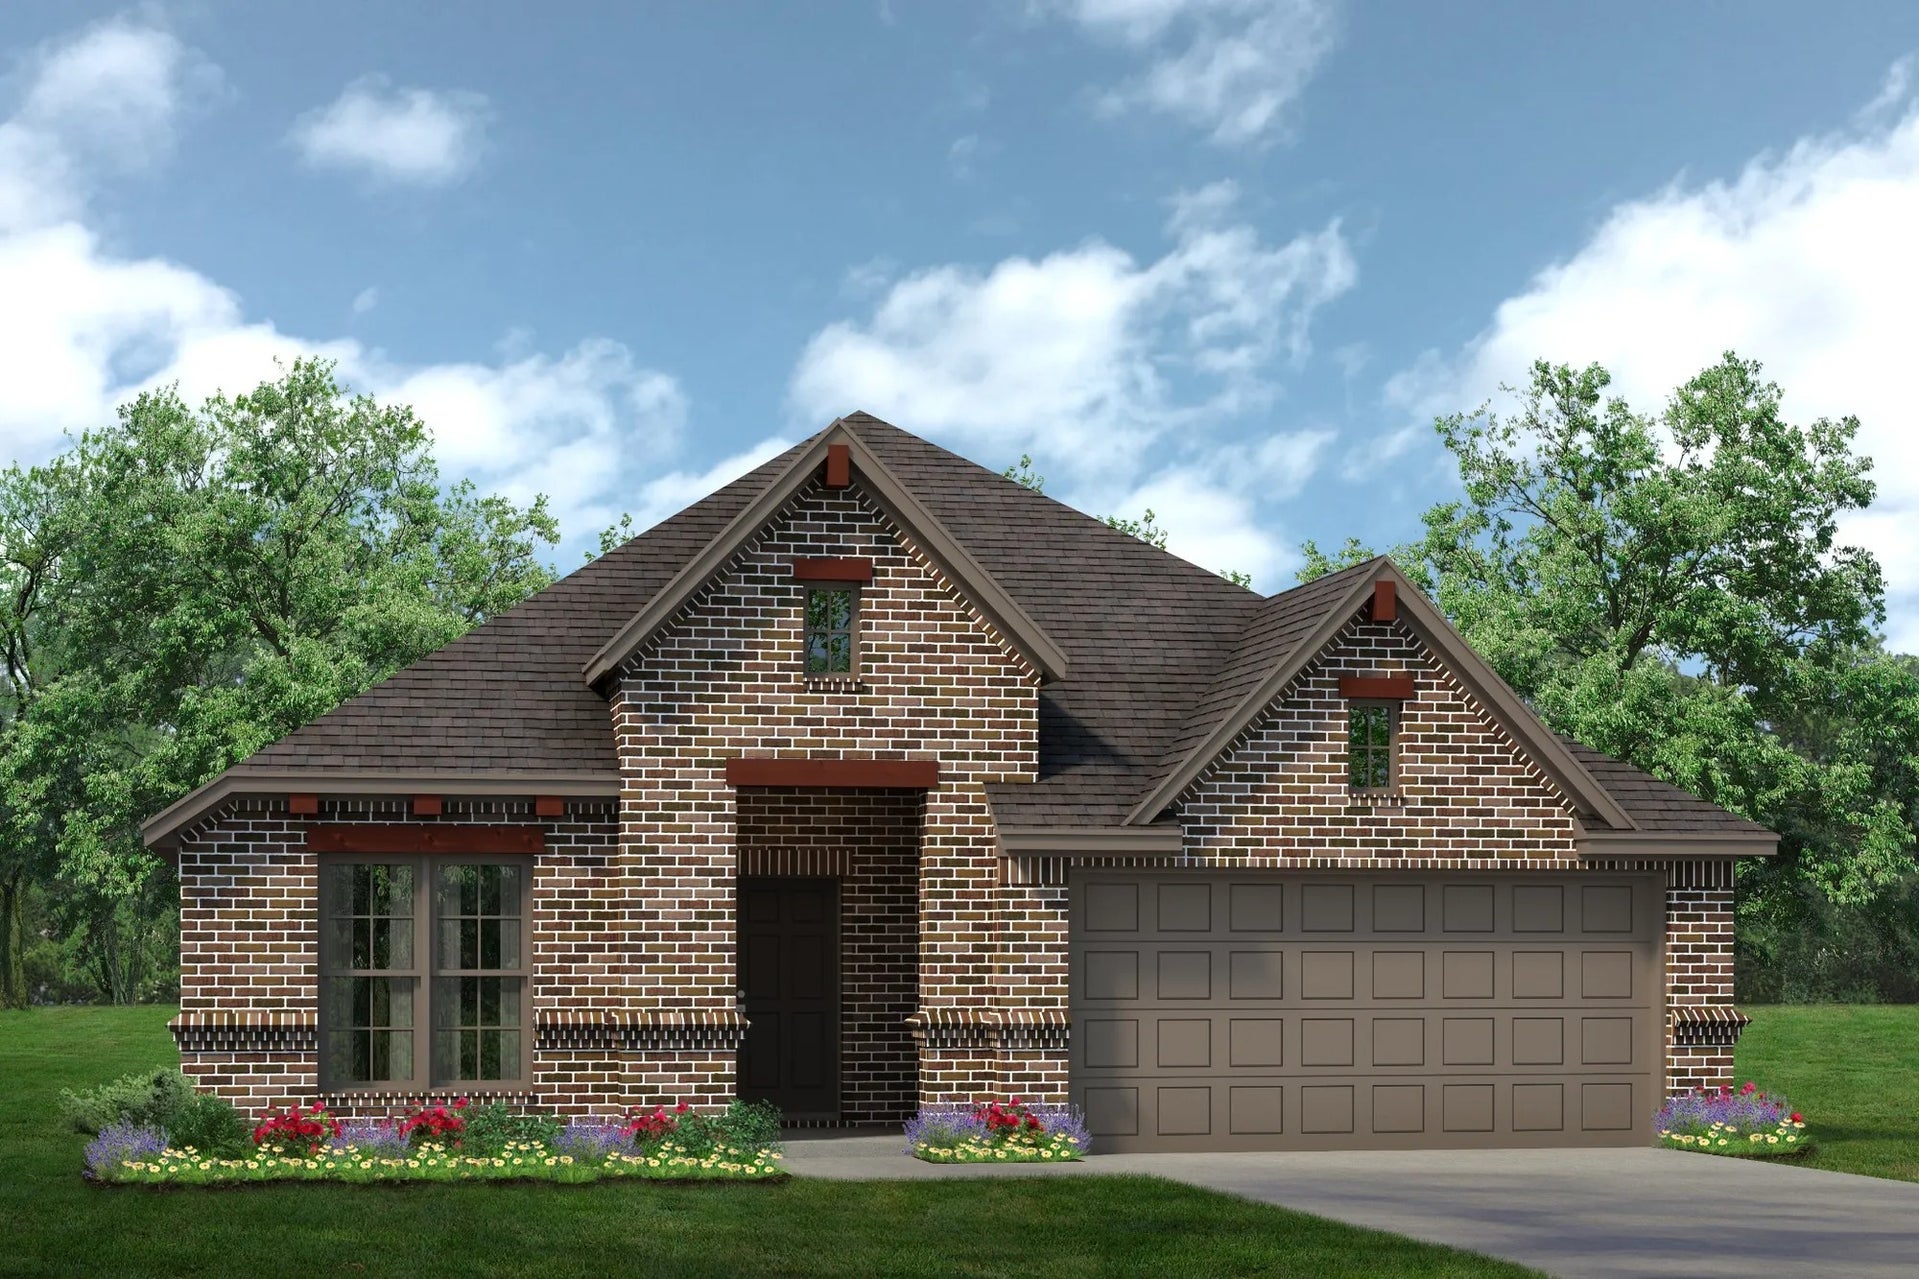 2186 C. 2,206sf New Home in Crowley, TX